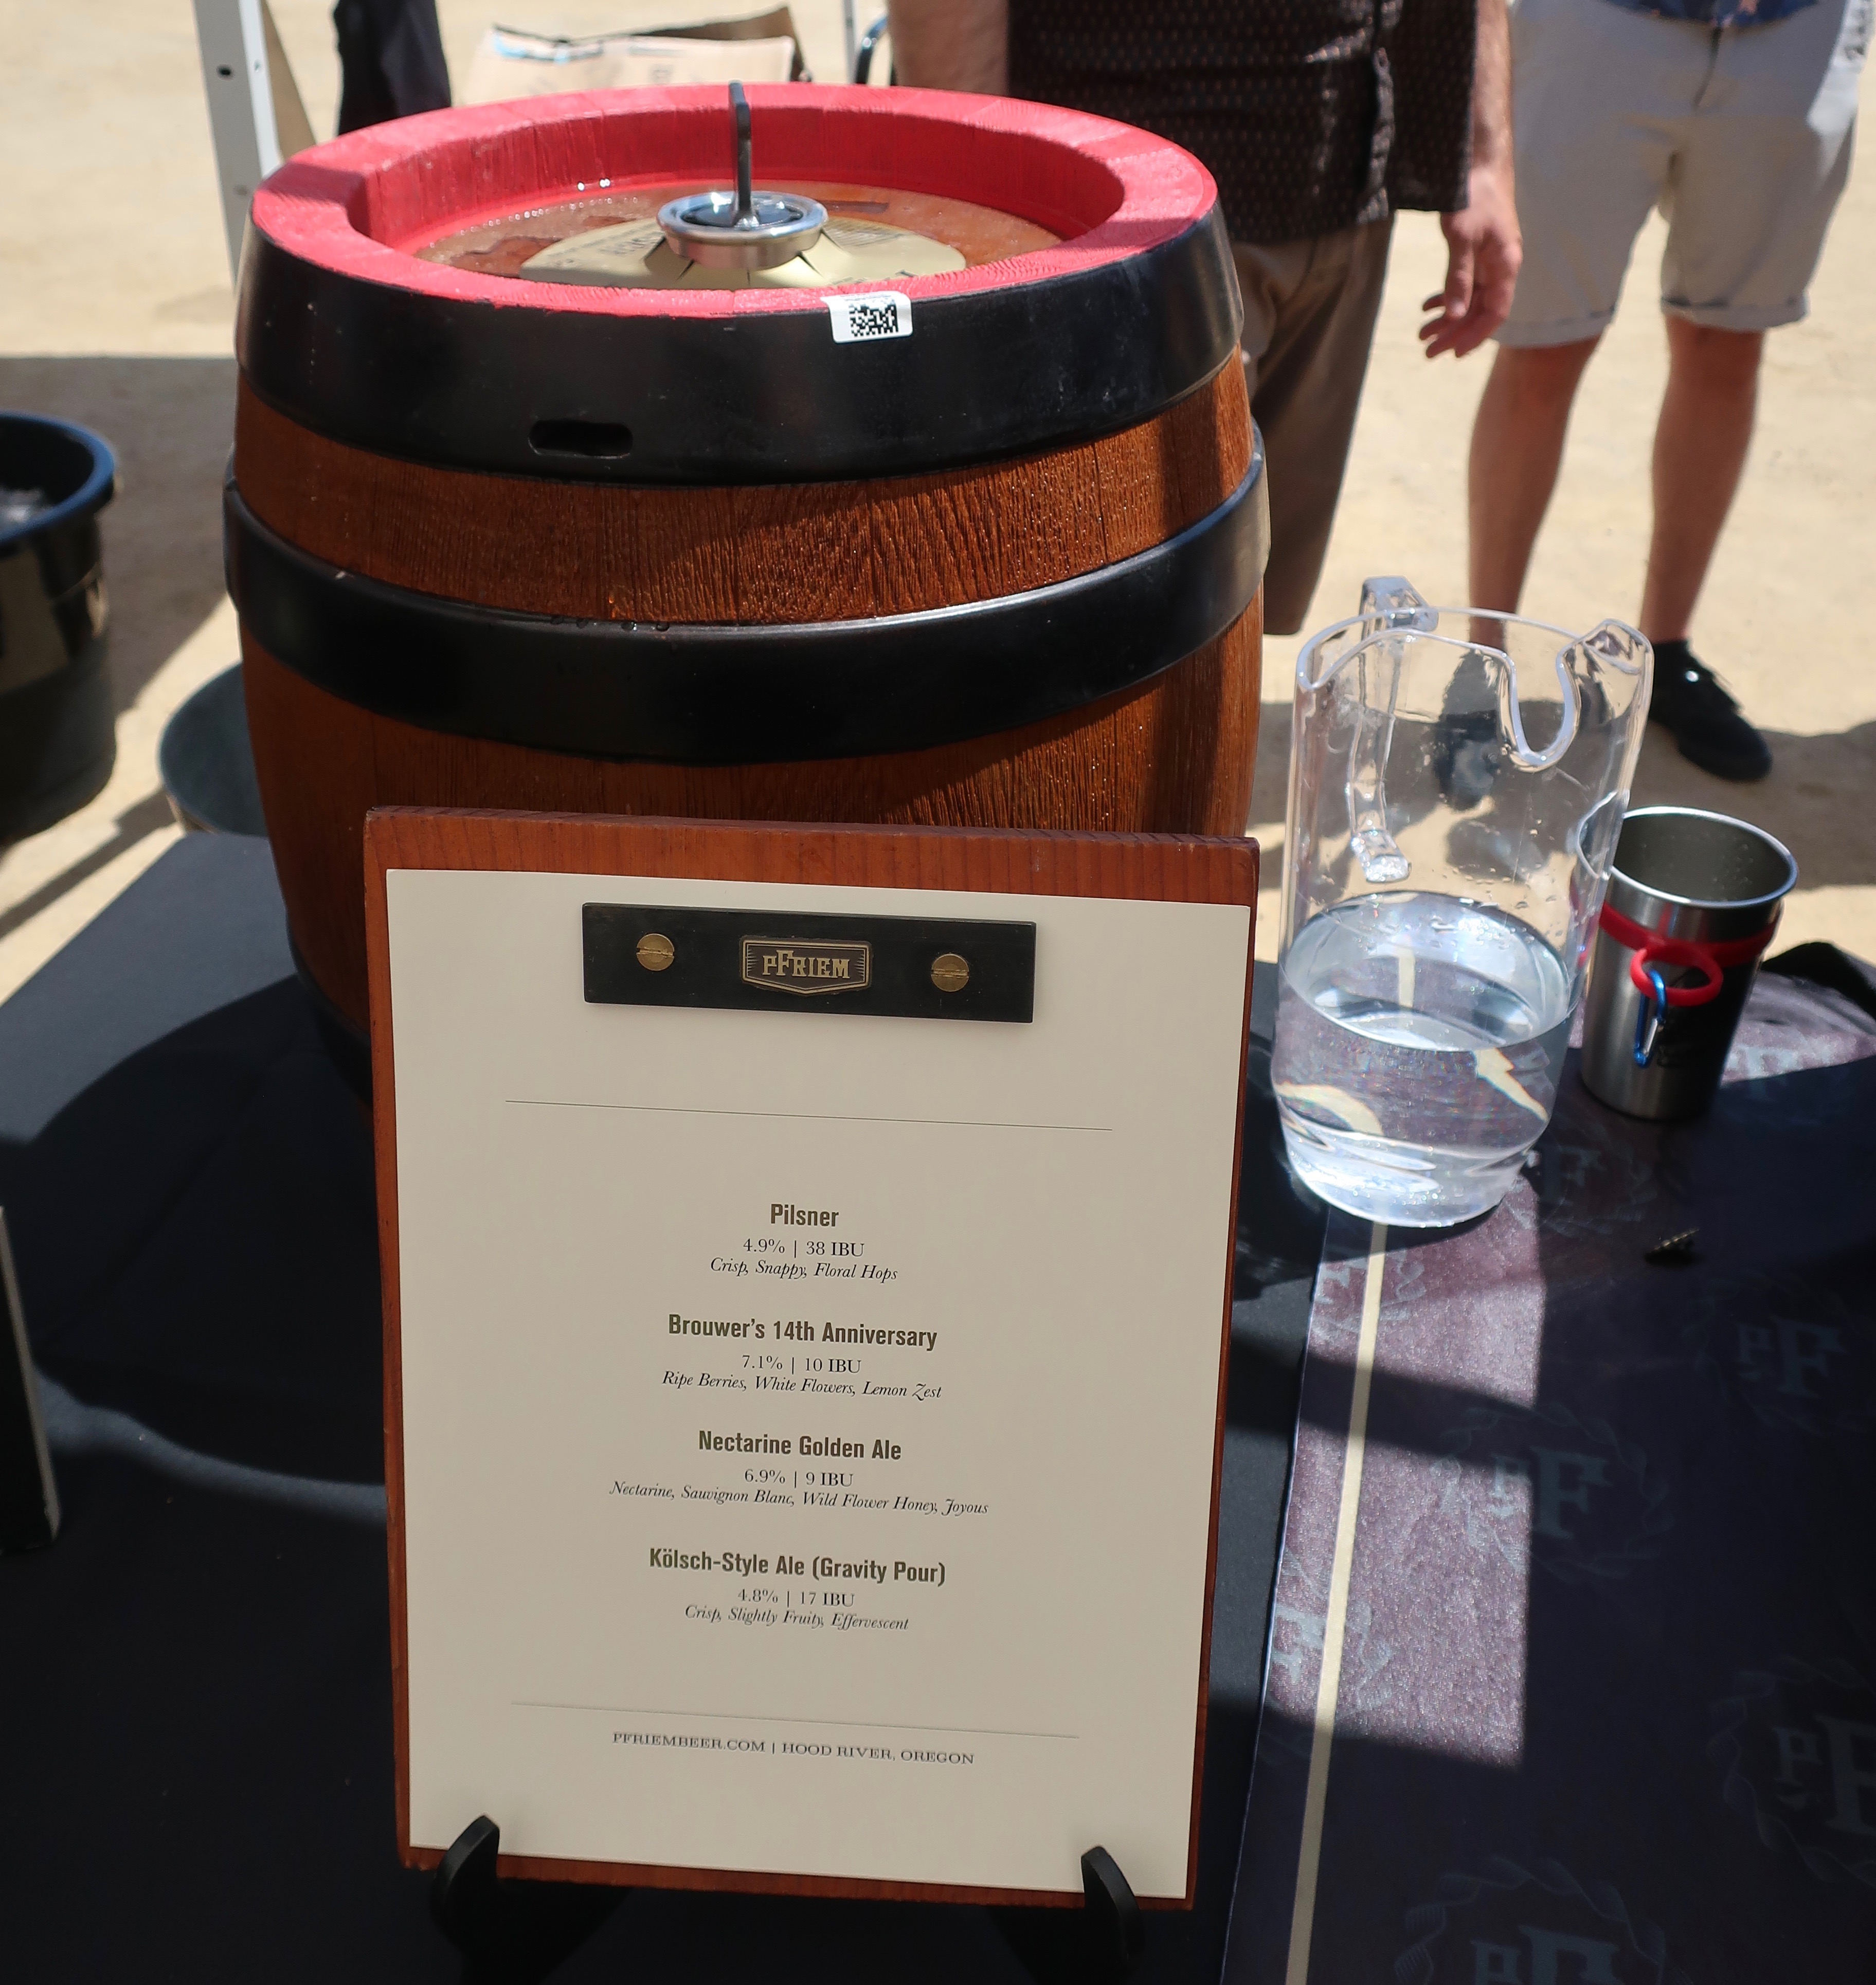 pFriem Family Brewers debuted its gravity fed keg that poured its Kölsch-Style Ale at the 2019 Firestone Walker Invitational Beer Fest.